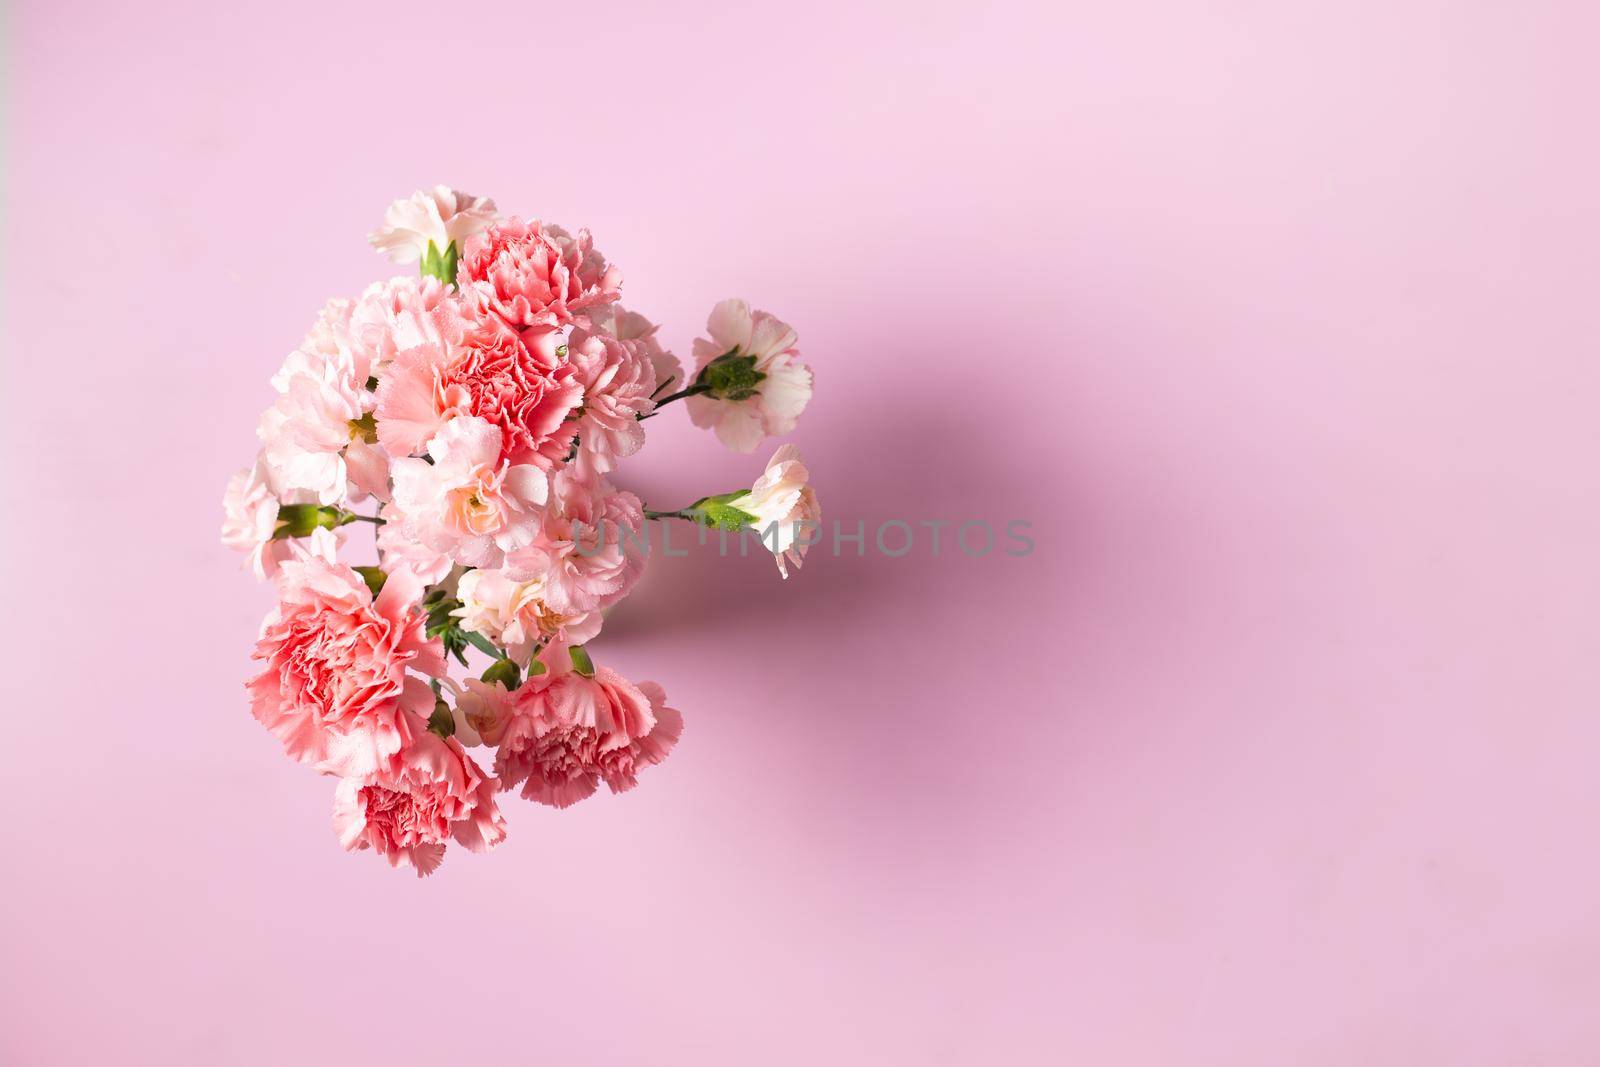 Carnation flowers on pink background, Mother's Day and Valentines Day